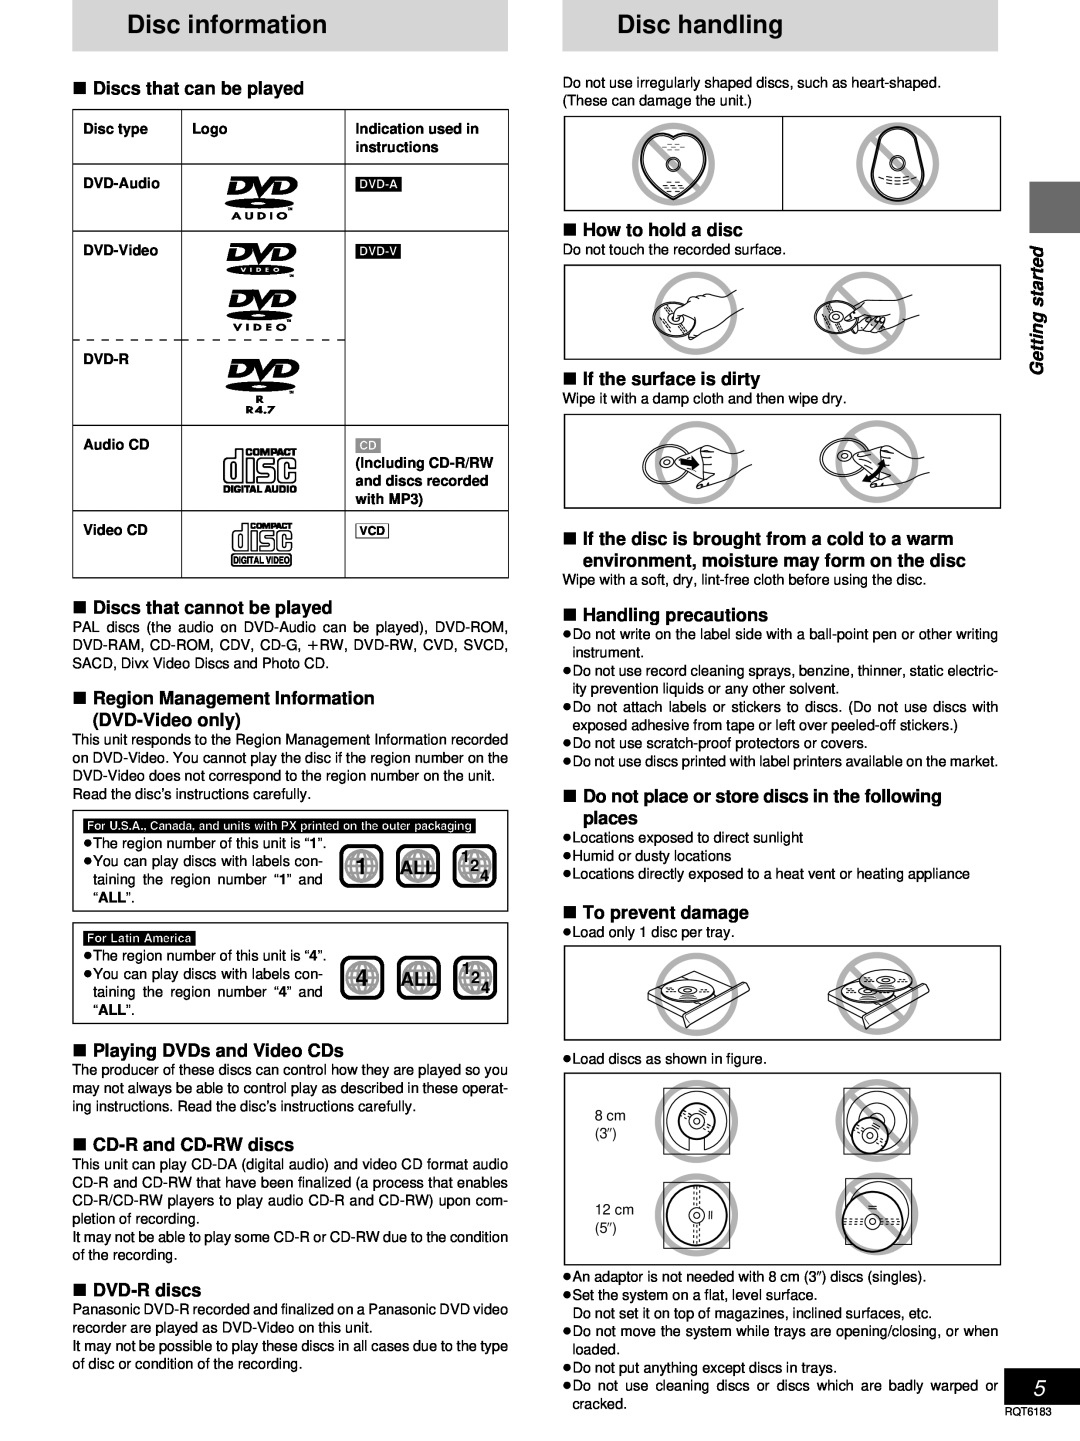 Panasonic SC-HT75, SC-HT95 warranty Disc information, Disc handling, Gettingstarted, If the surface is dirty 